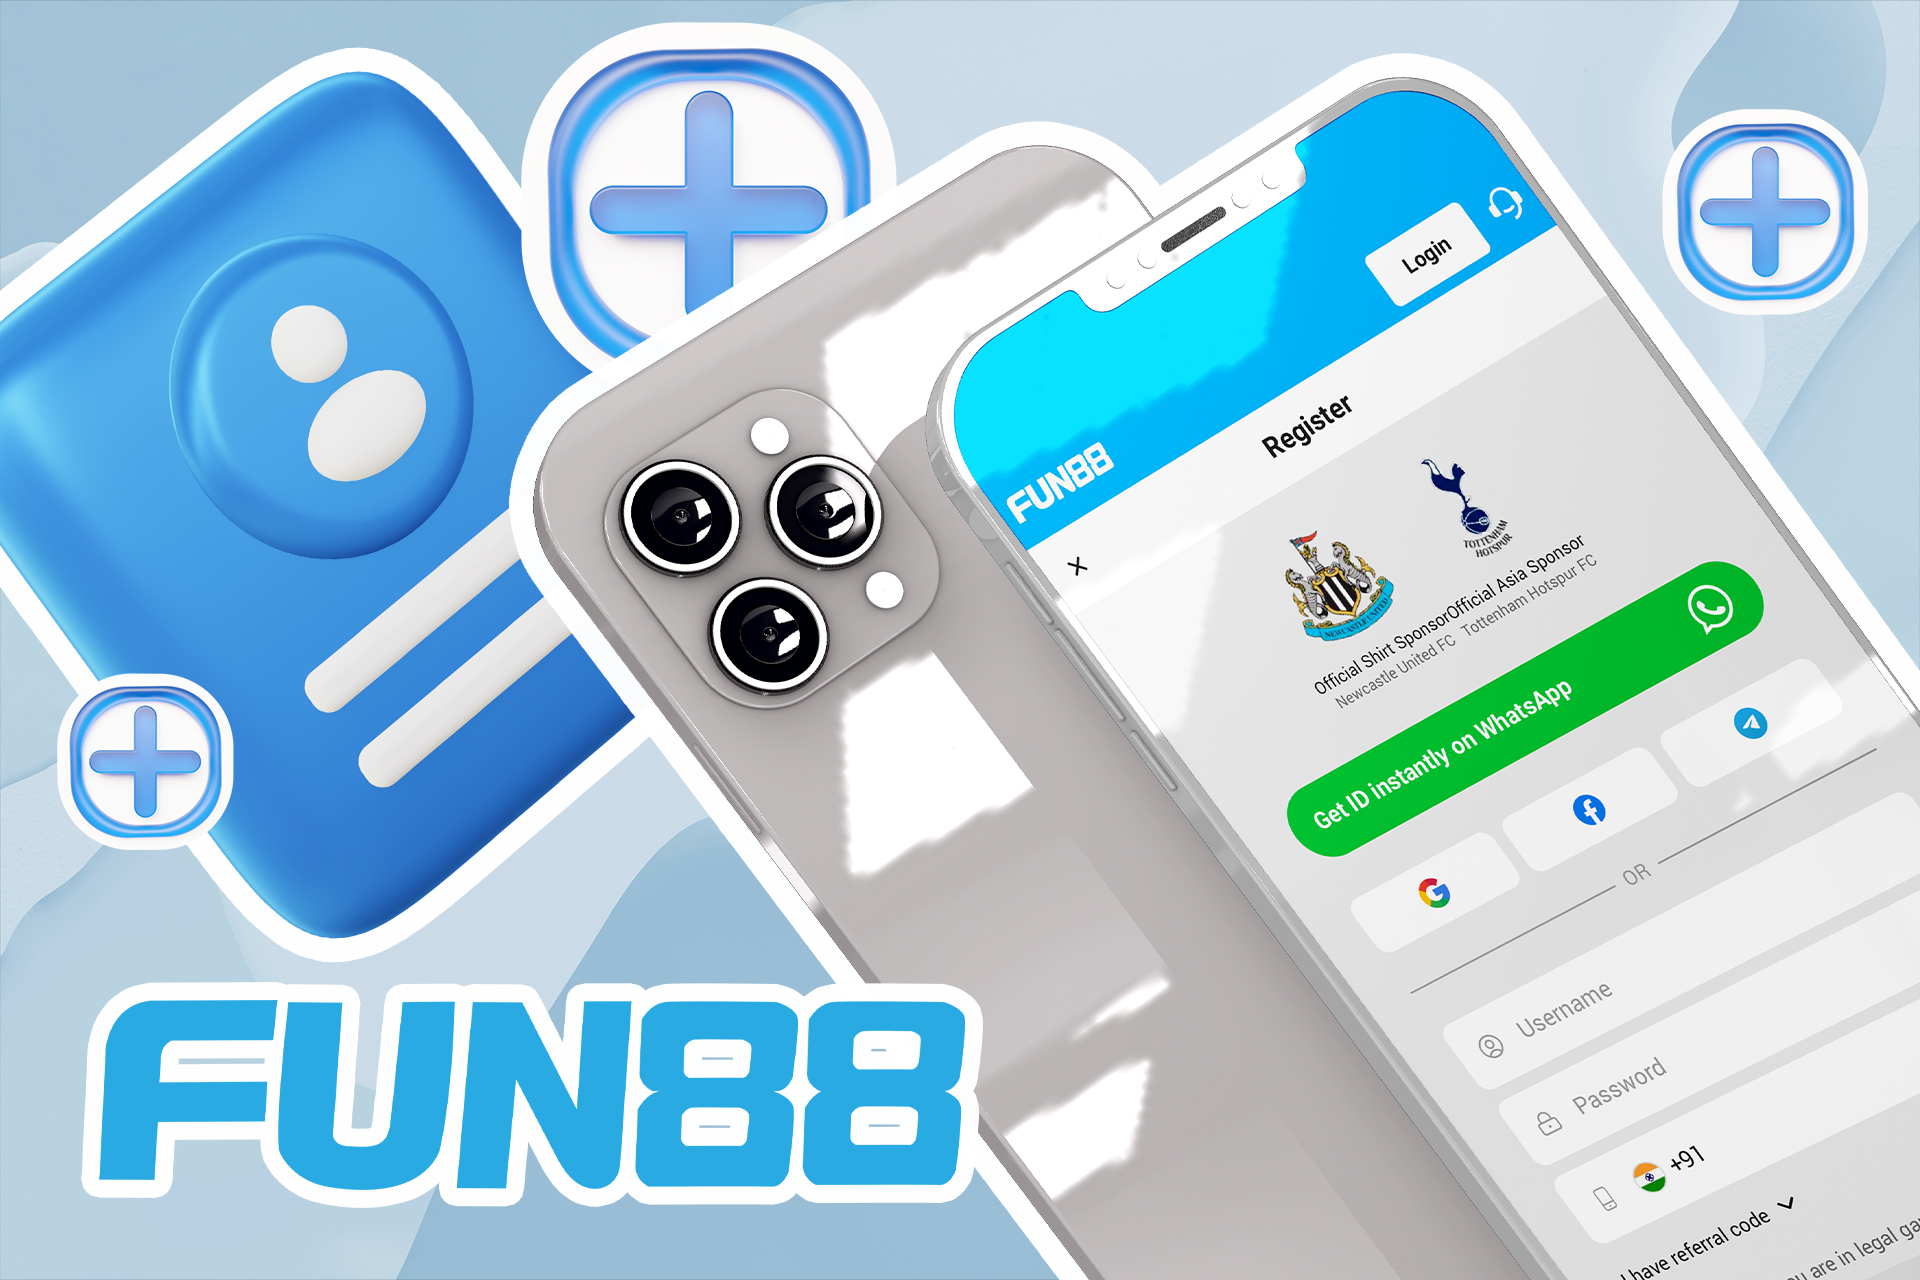 Download and install the Fun88 app and sign up for it via your smartphone.